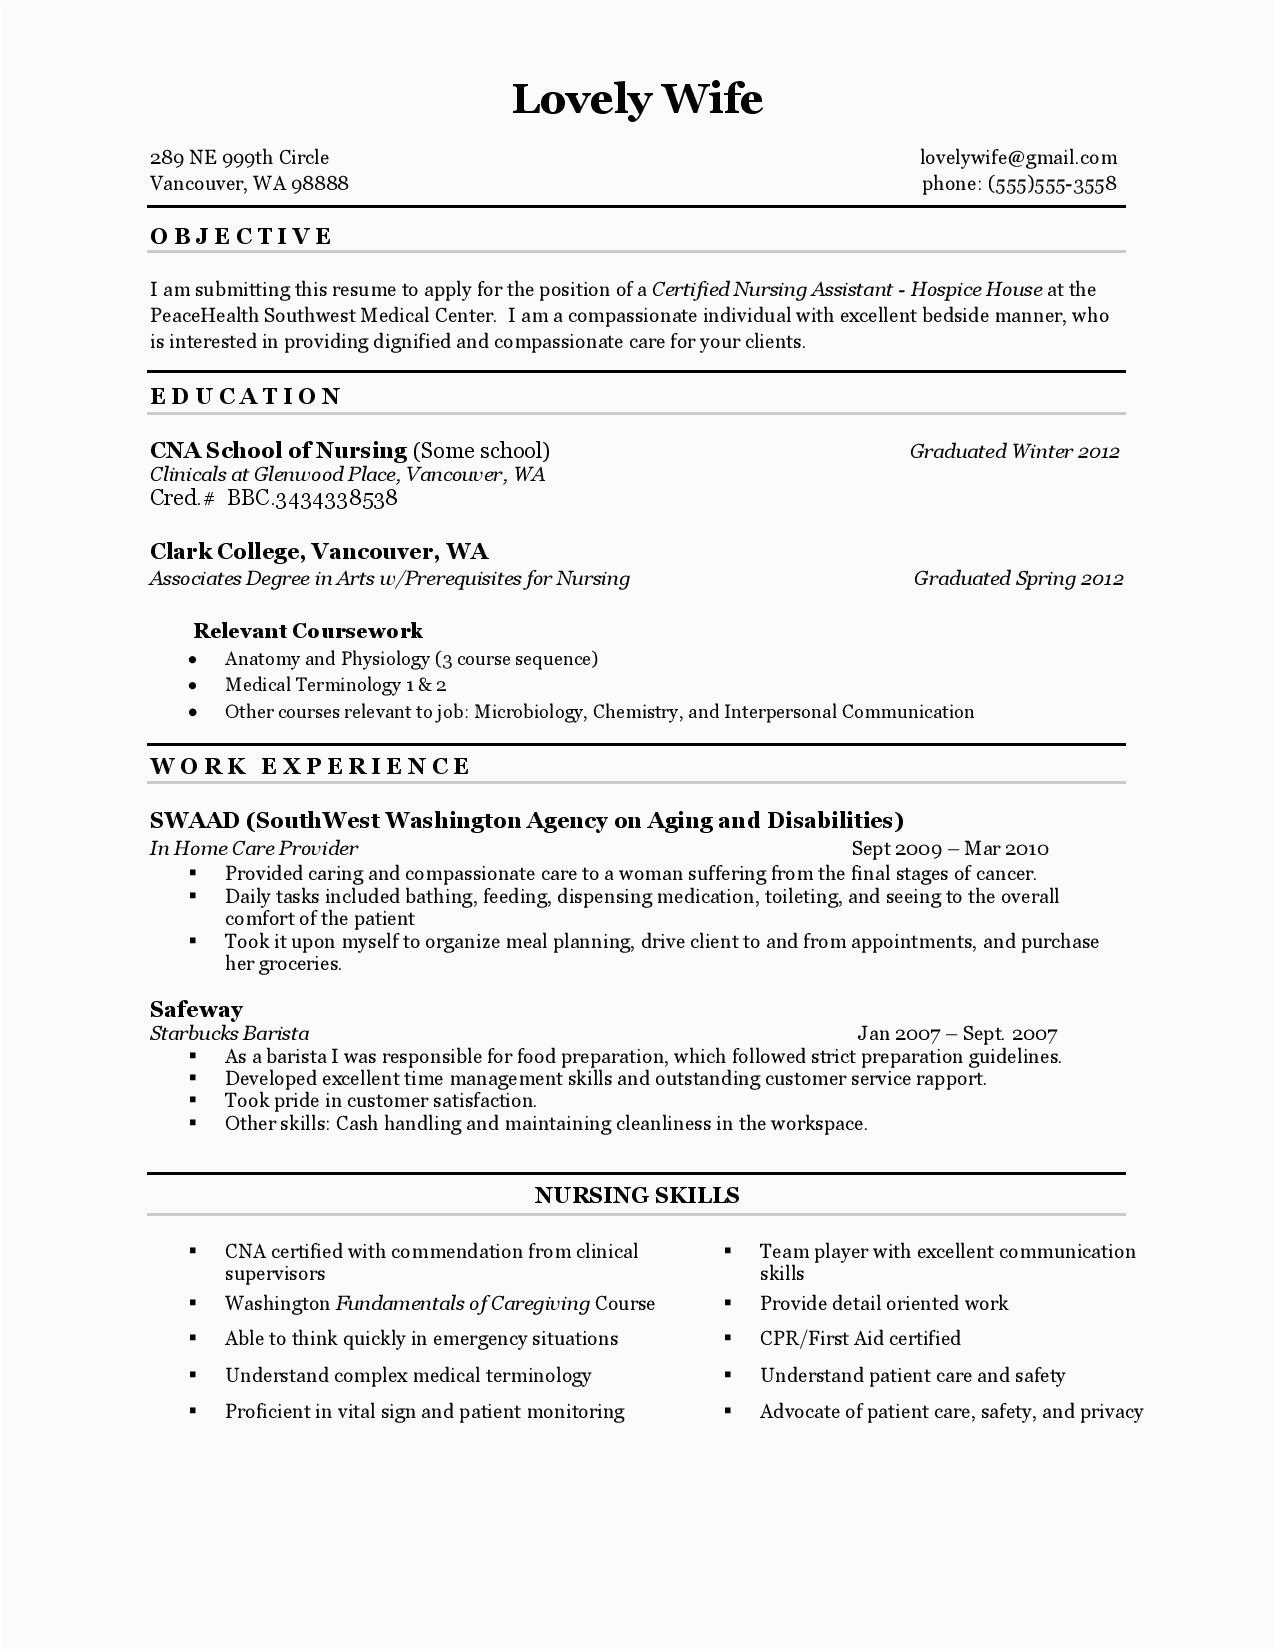 Sample Resume for Cna with Previous Experience 12 13 List Of Cna Skills for Resume Loginnelkriver